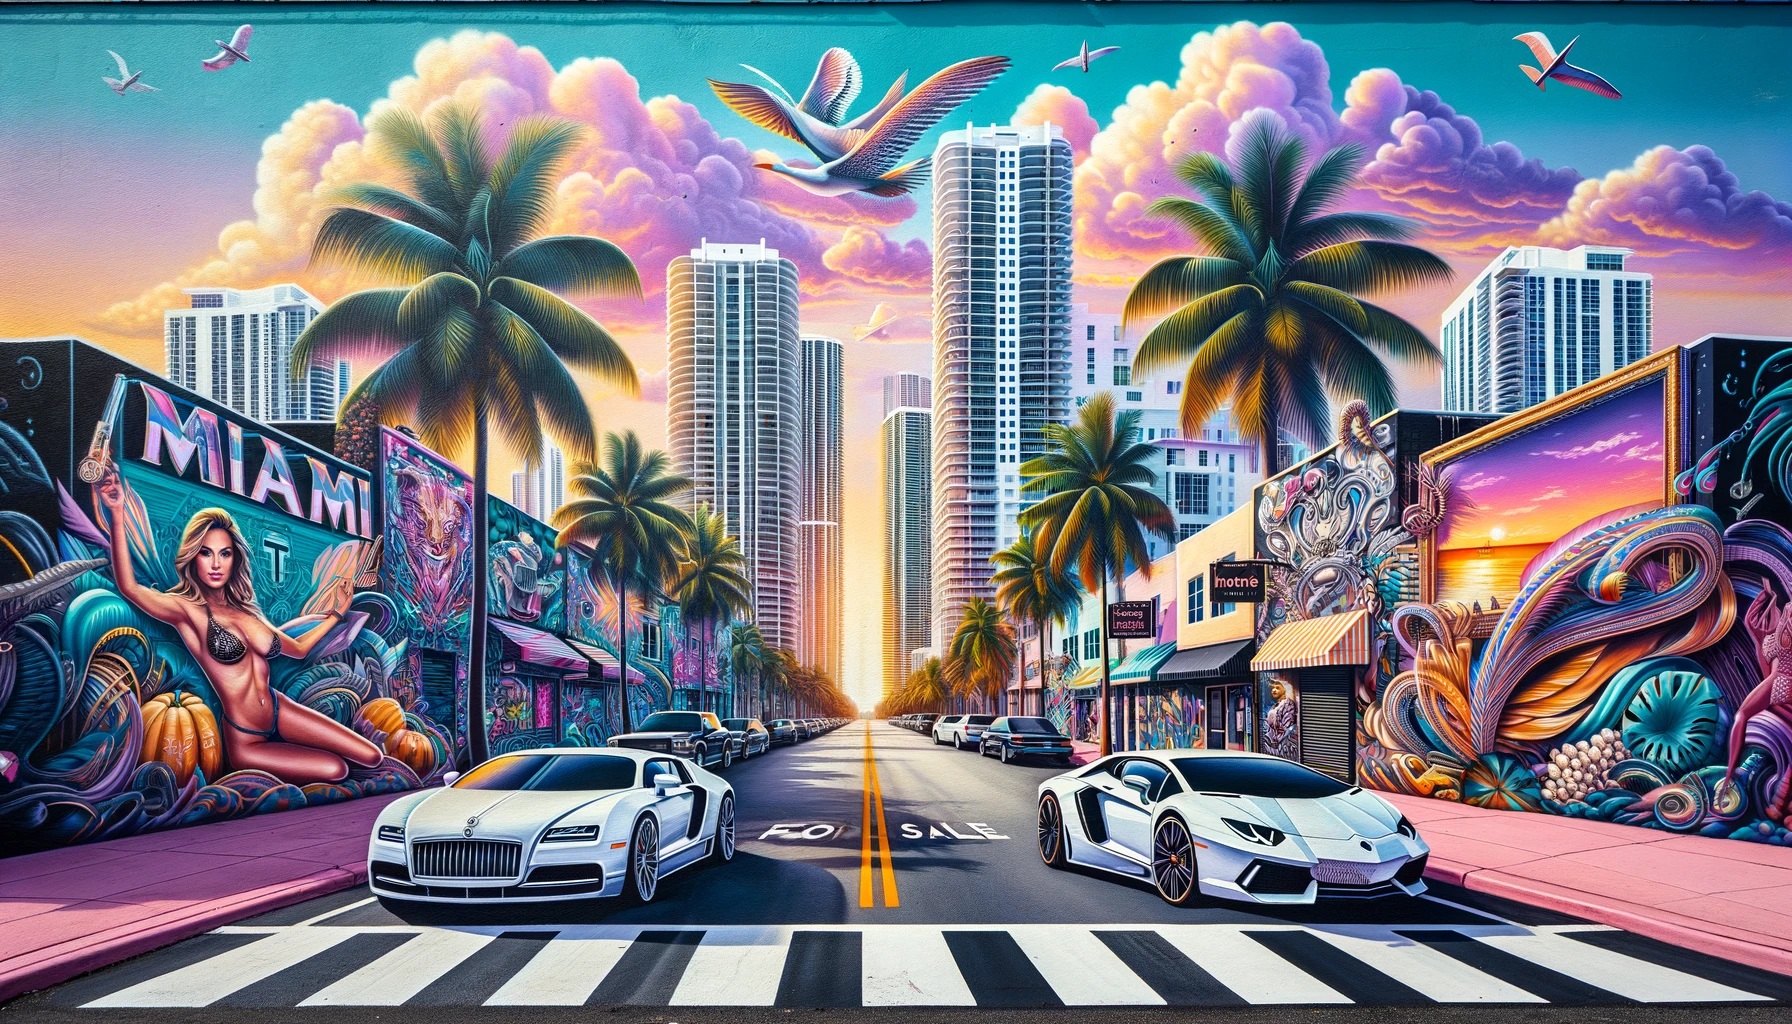 featured image for story, Miami - The Place To Be for Celebrities and Billionaires. The Hottest Spot for
Real Estate Investors.